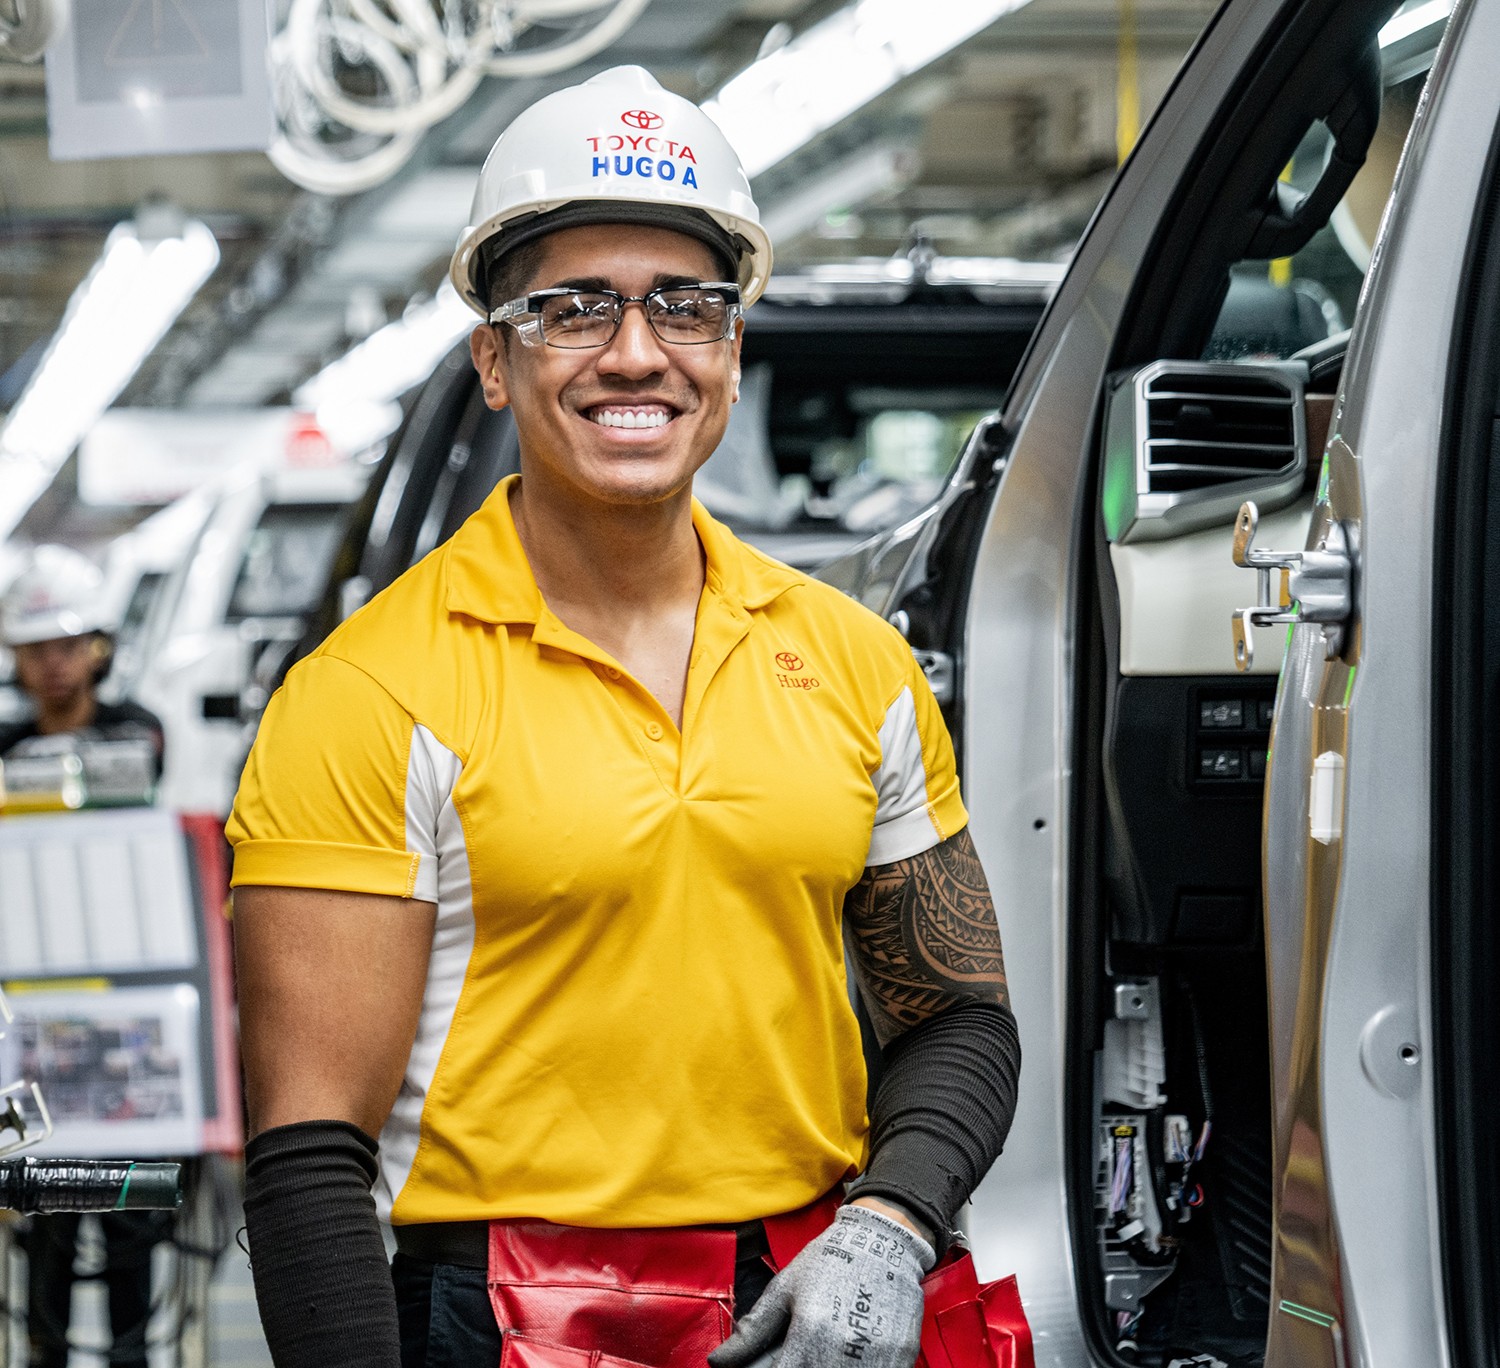 A factory worker in a yellow shirt and helmet stands next to a vehicle on the assembly line and smiles at the camera.